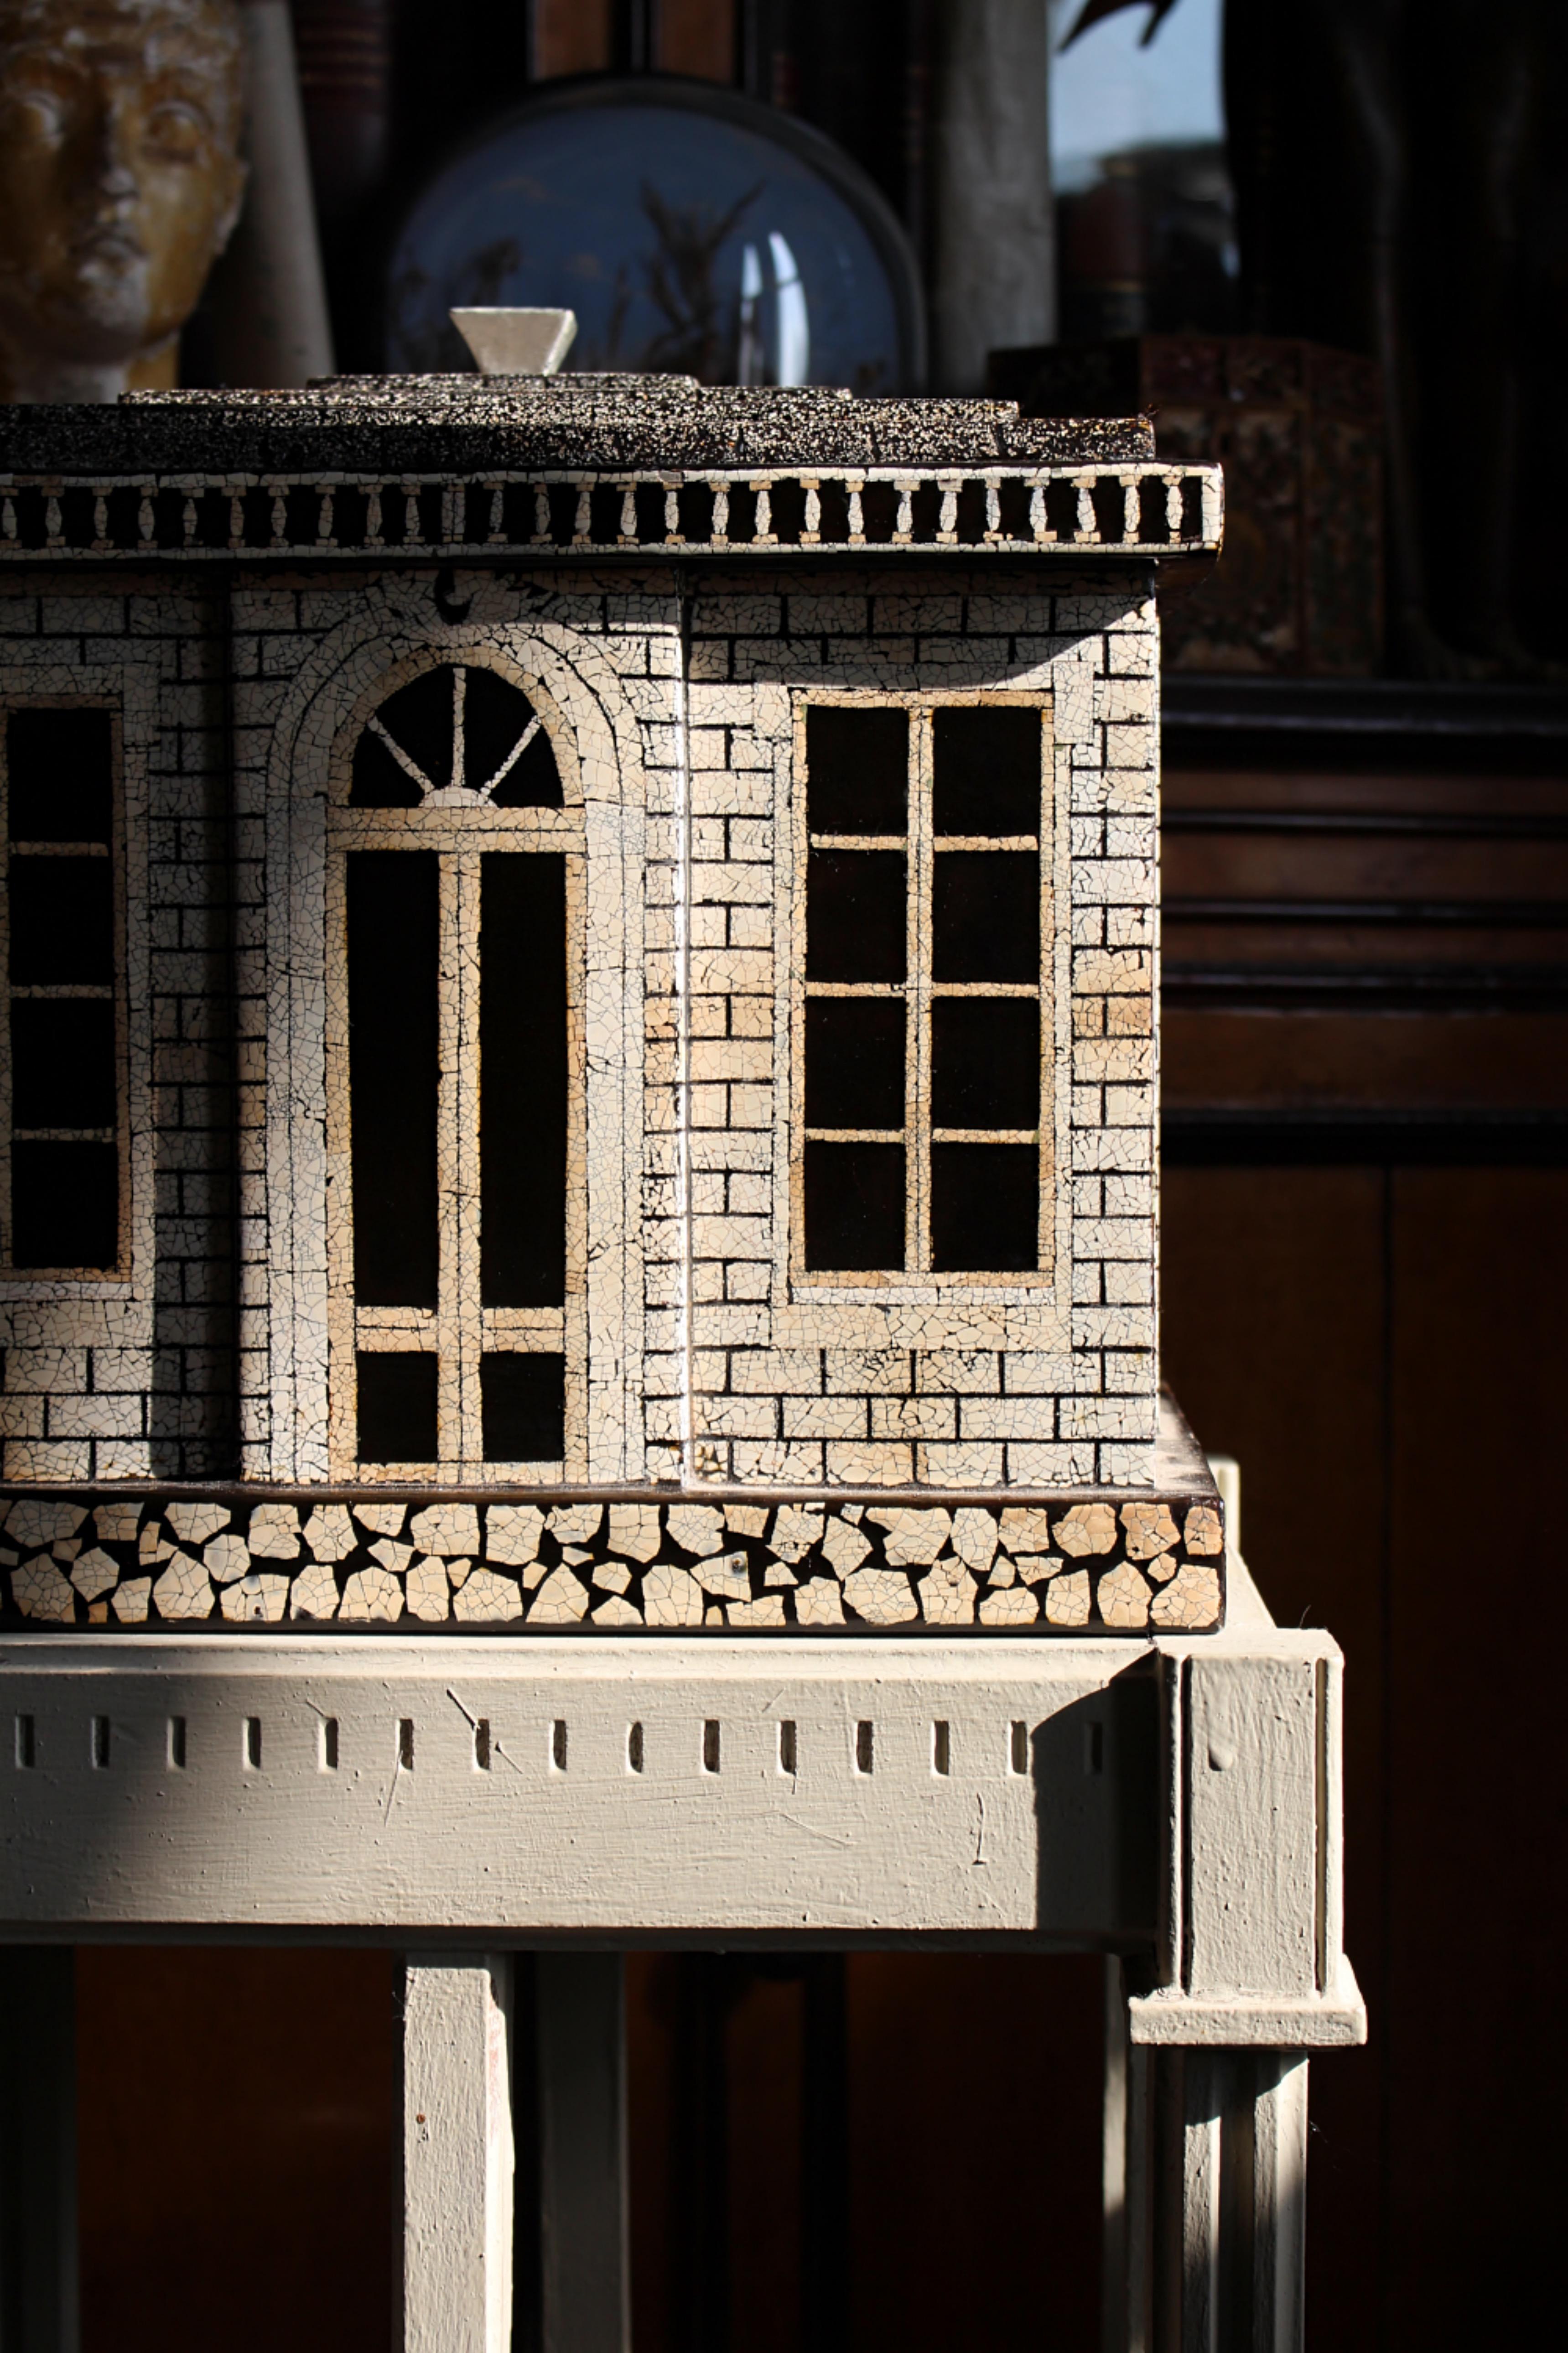 A rather wonderful box and cover in the form of a Georgian home, wooden carcass with a lacquered finish over a mosaic of eggshells.

The stepped cover/roof lifts to reveal a internal void.

Produced by the French Artist Thierry Voeltzel

Very minor